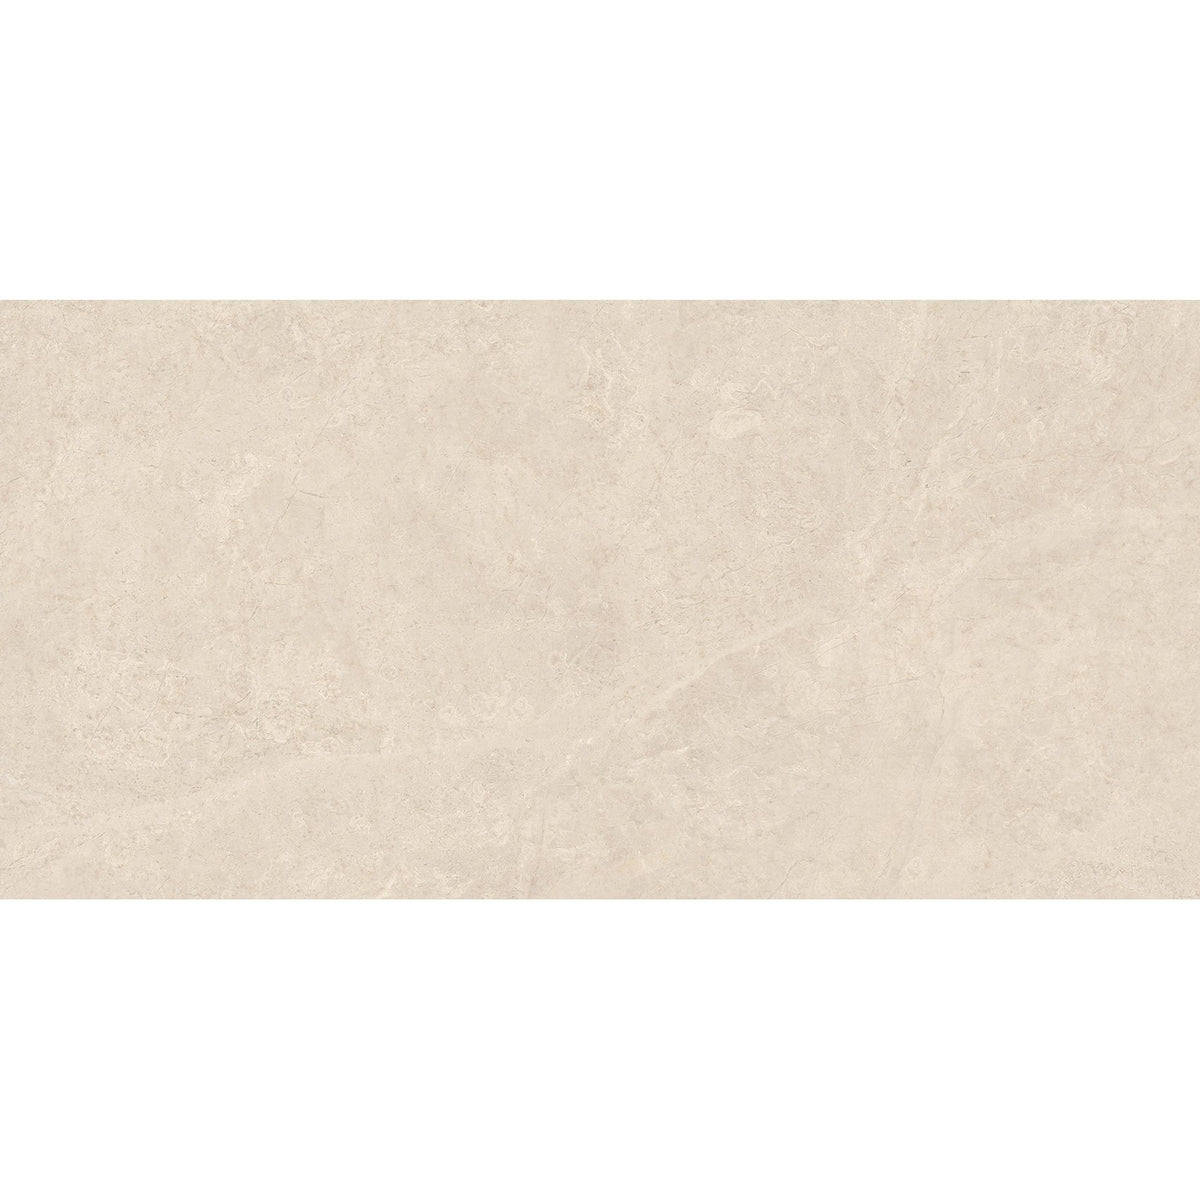 Anatolia Mayfair 12 in. x 24 in. HD Rectified Porcelain Tile - Allure Ivory (Polished)